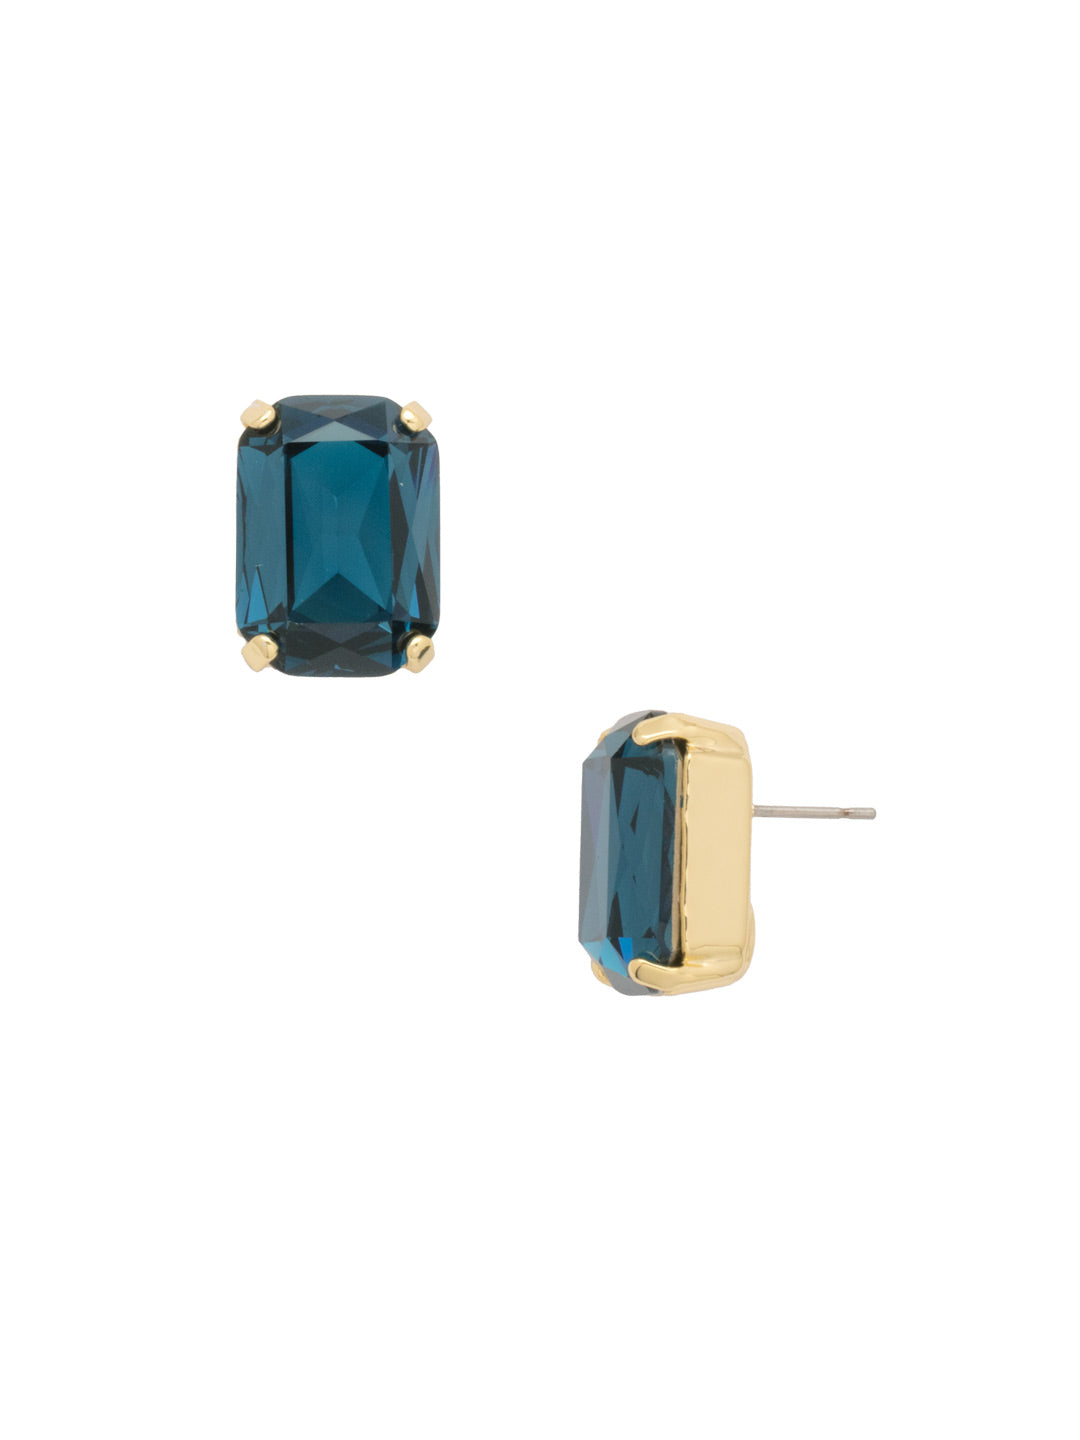 Brynn Stud Earrings - EBY44BGMON - <p>The Brynn Stud Earrings can be worn alone or paired with a fabulous statement necklace for some added sparkle to any outfit. From Sorrelli's Montana collection in our Bright Gold-tone finish.</p>